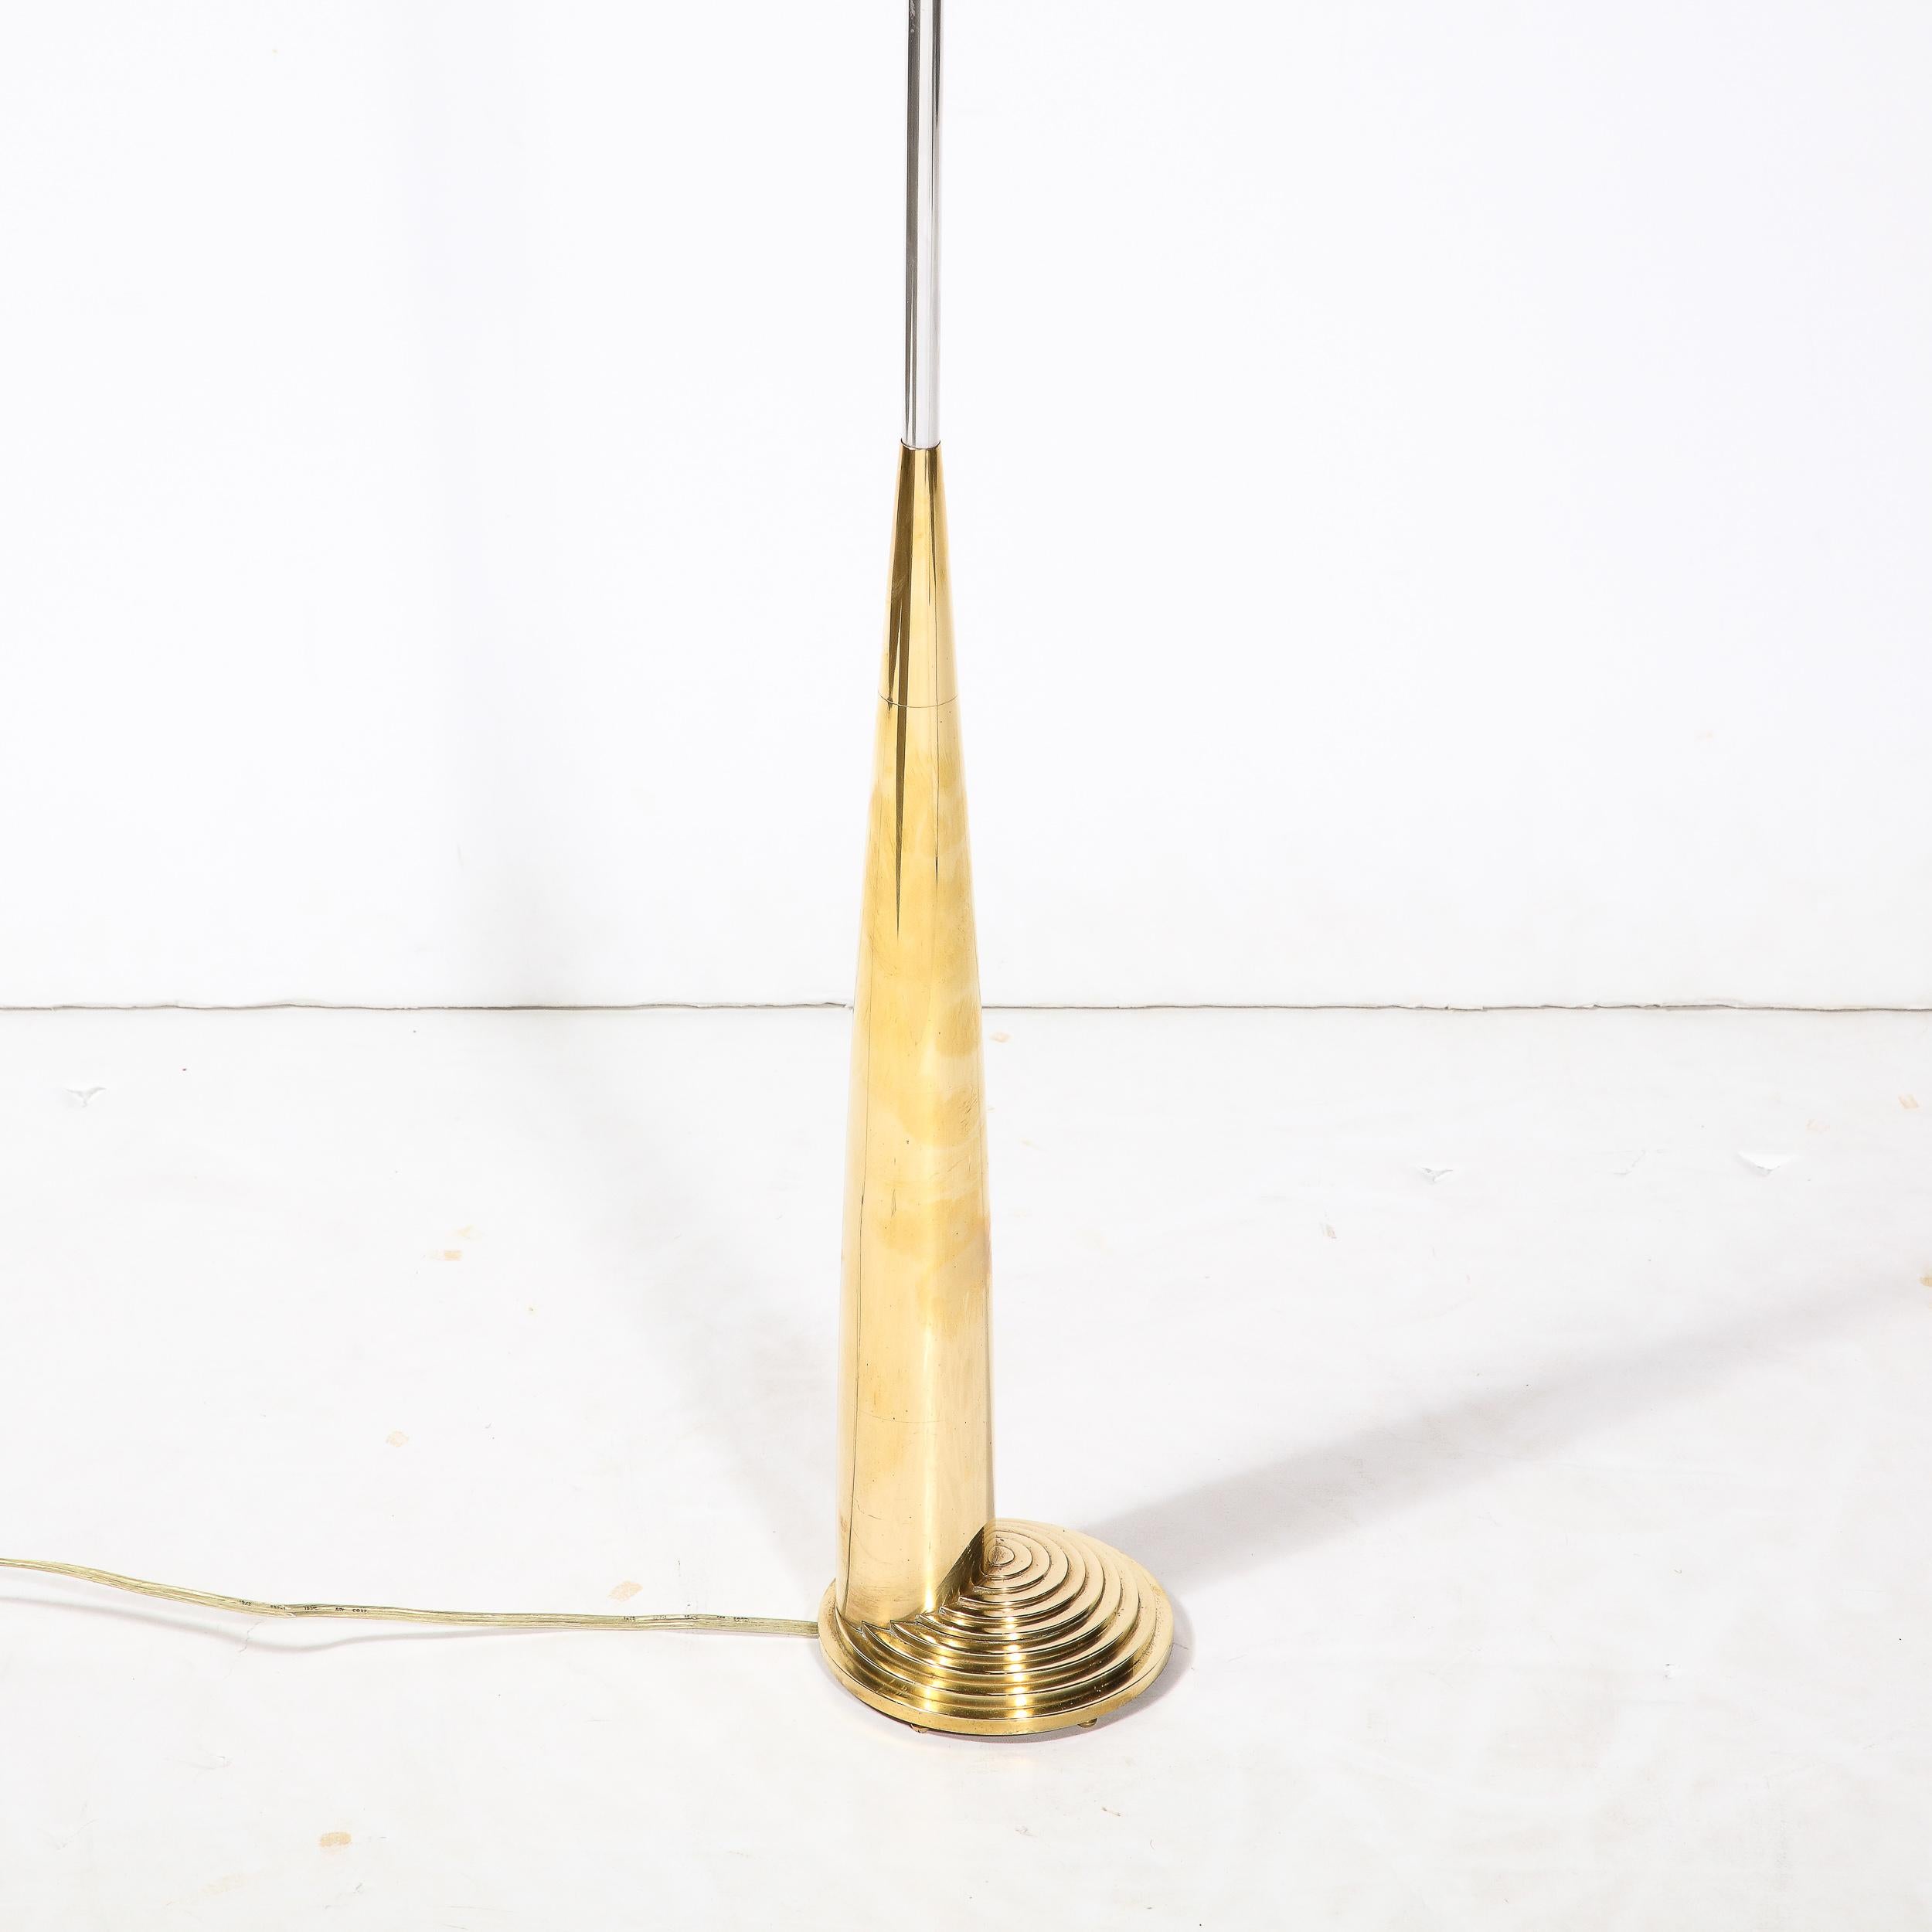 This stunning Mid-Century Modernist Floor Lamp by Cedric Hartman is a beautiful example of the heights of Mid-Century Modernist design, skilfully executed in the highest quality materials, originating from the United States in 1979. Featuring a